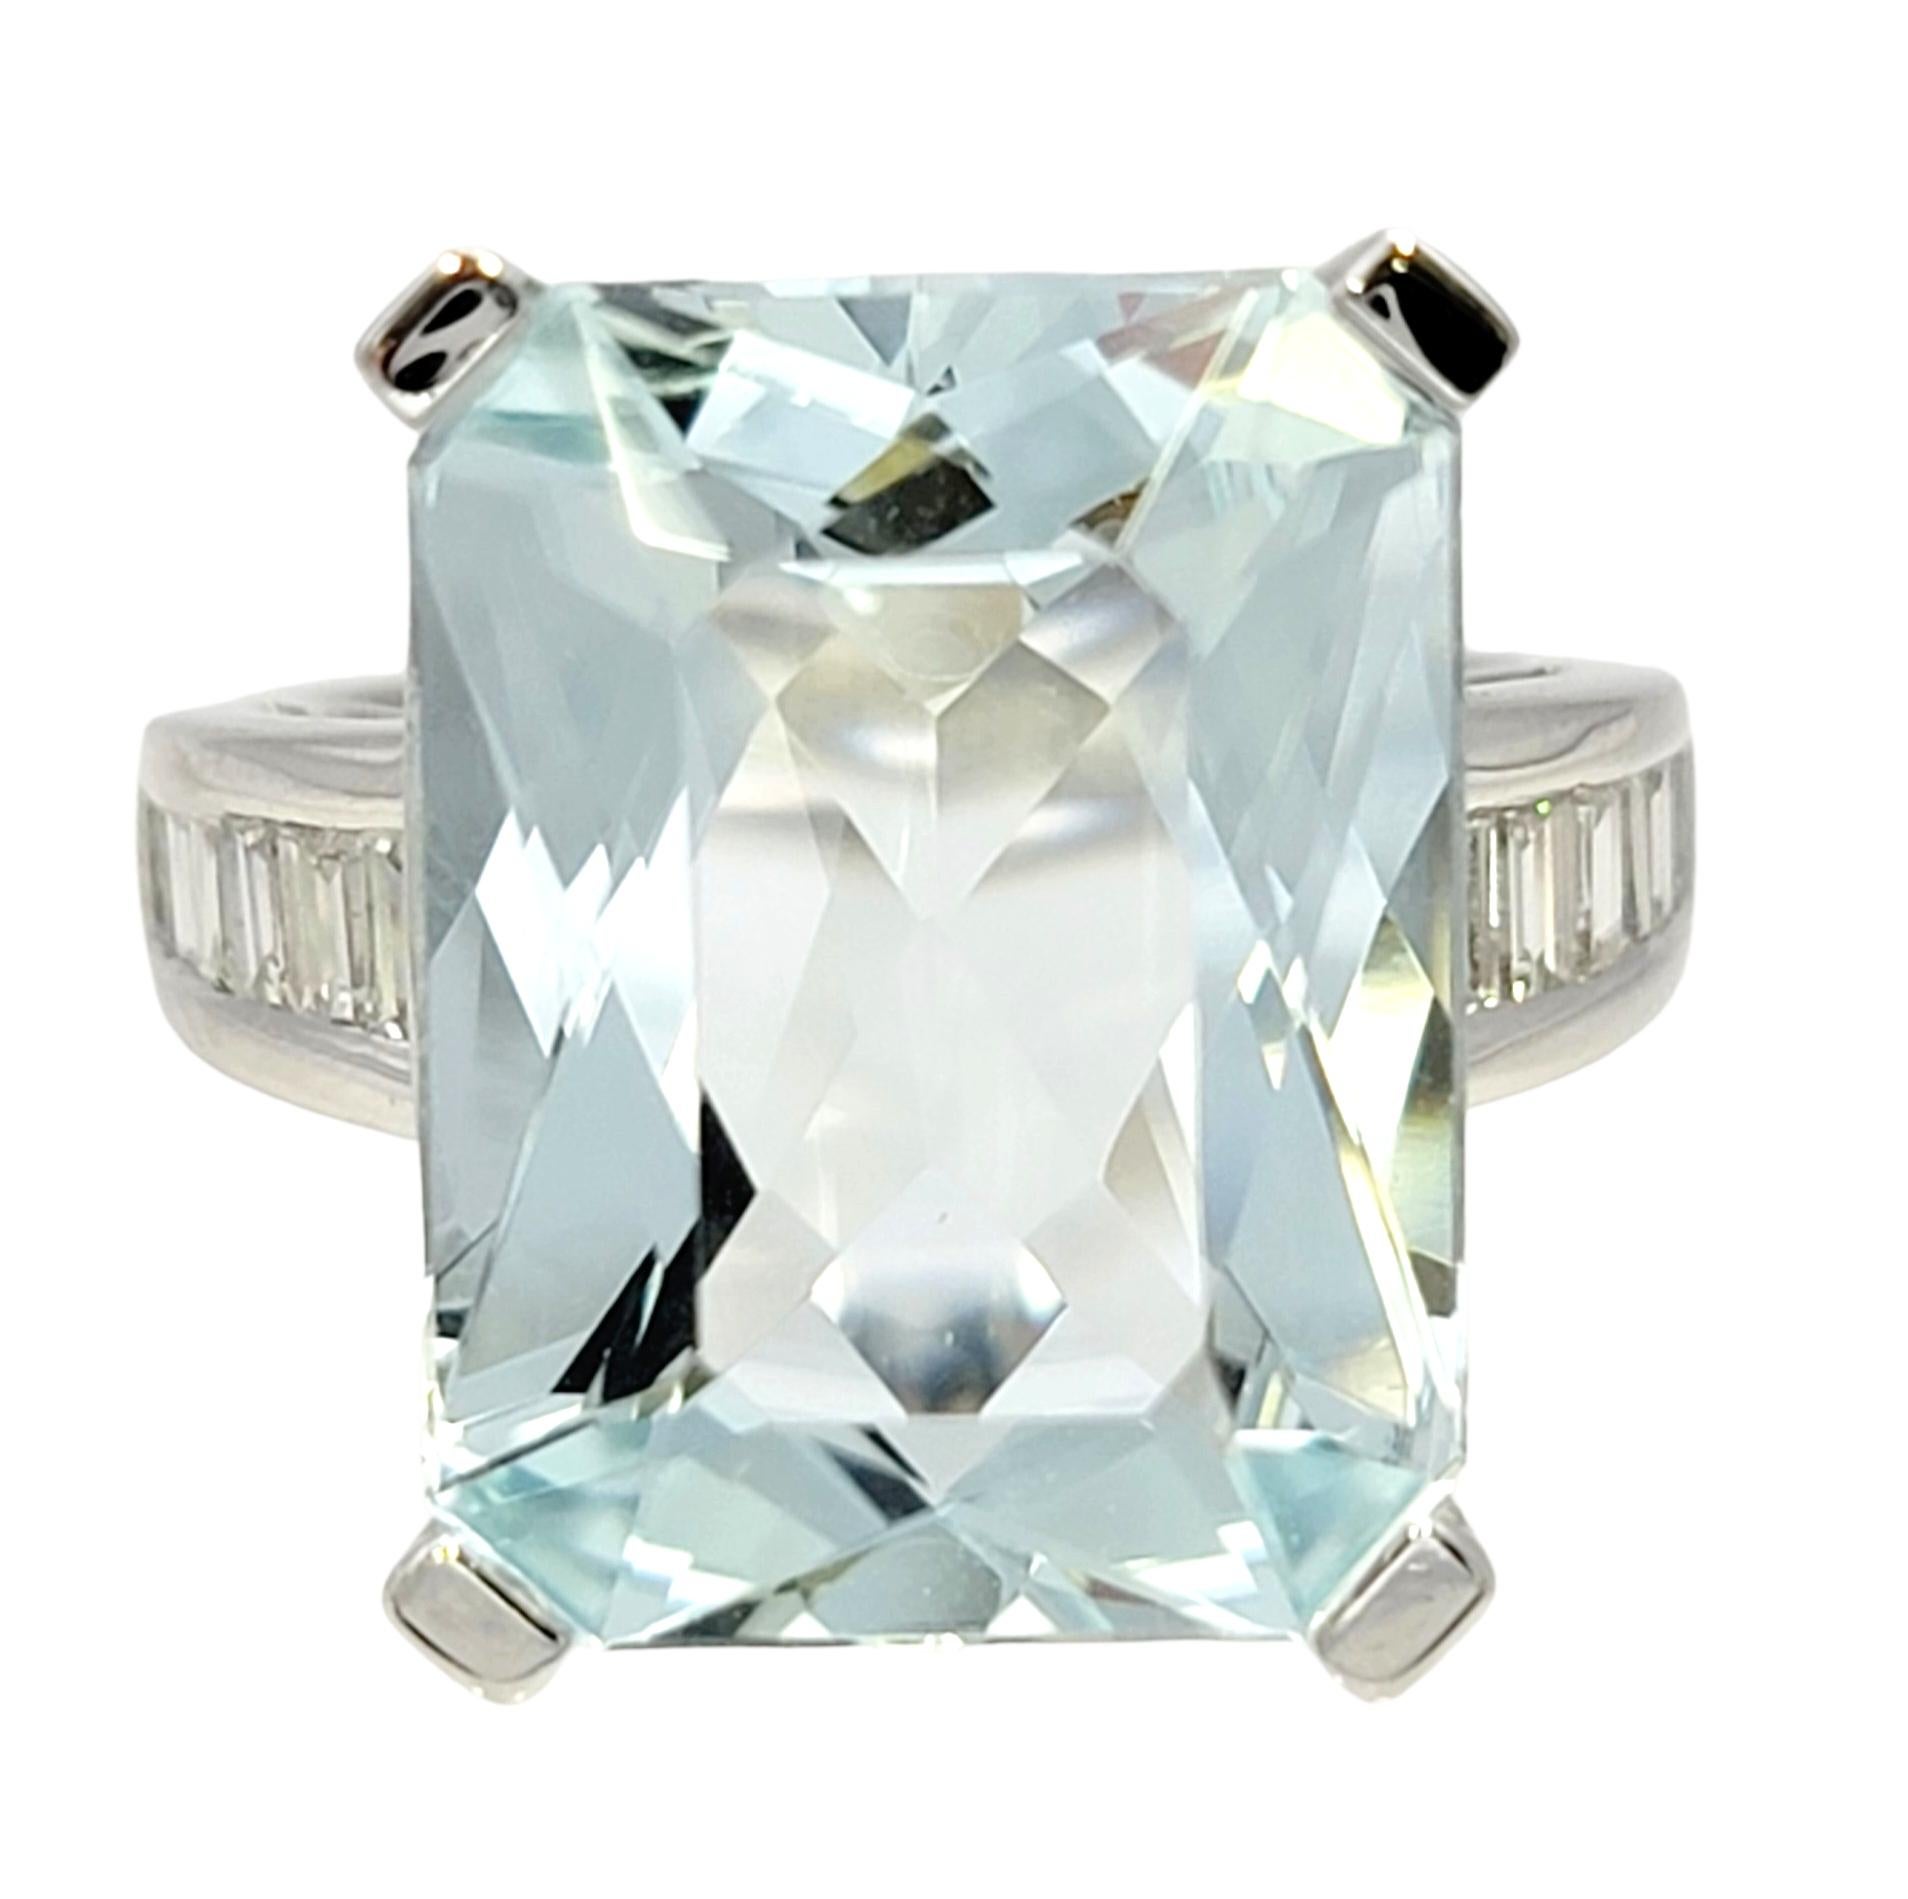 Ring size: 5

Elegant and captivating, behold this exquisite aquamarine and diamond cocktail ring crafted in polished platinum. A true embodiment of luxury, this remarkable piece is sure to make a lasting impression.

At the center of the piece is a